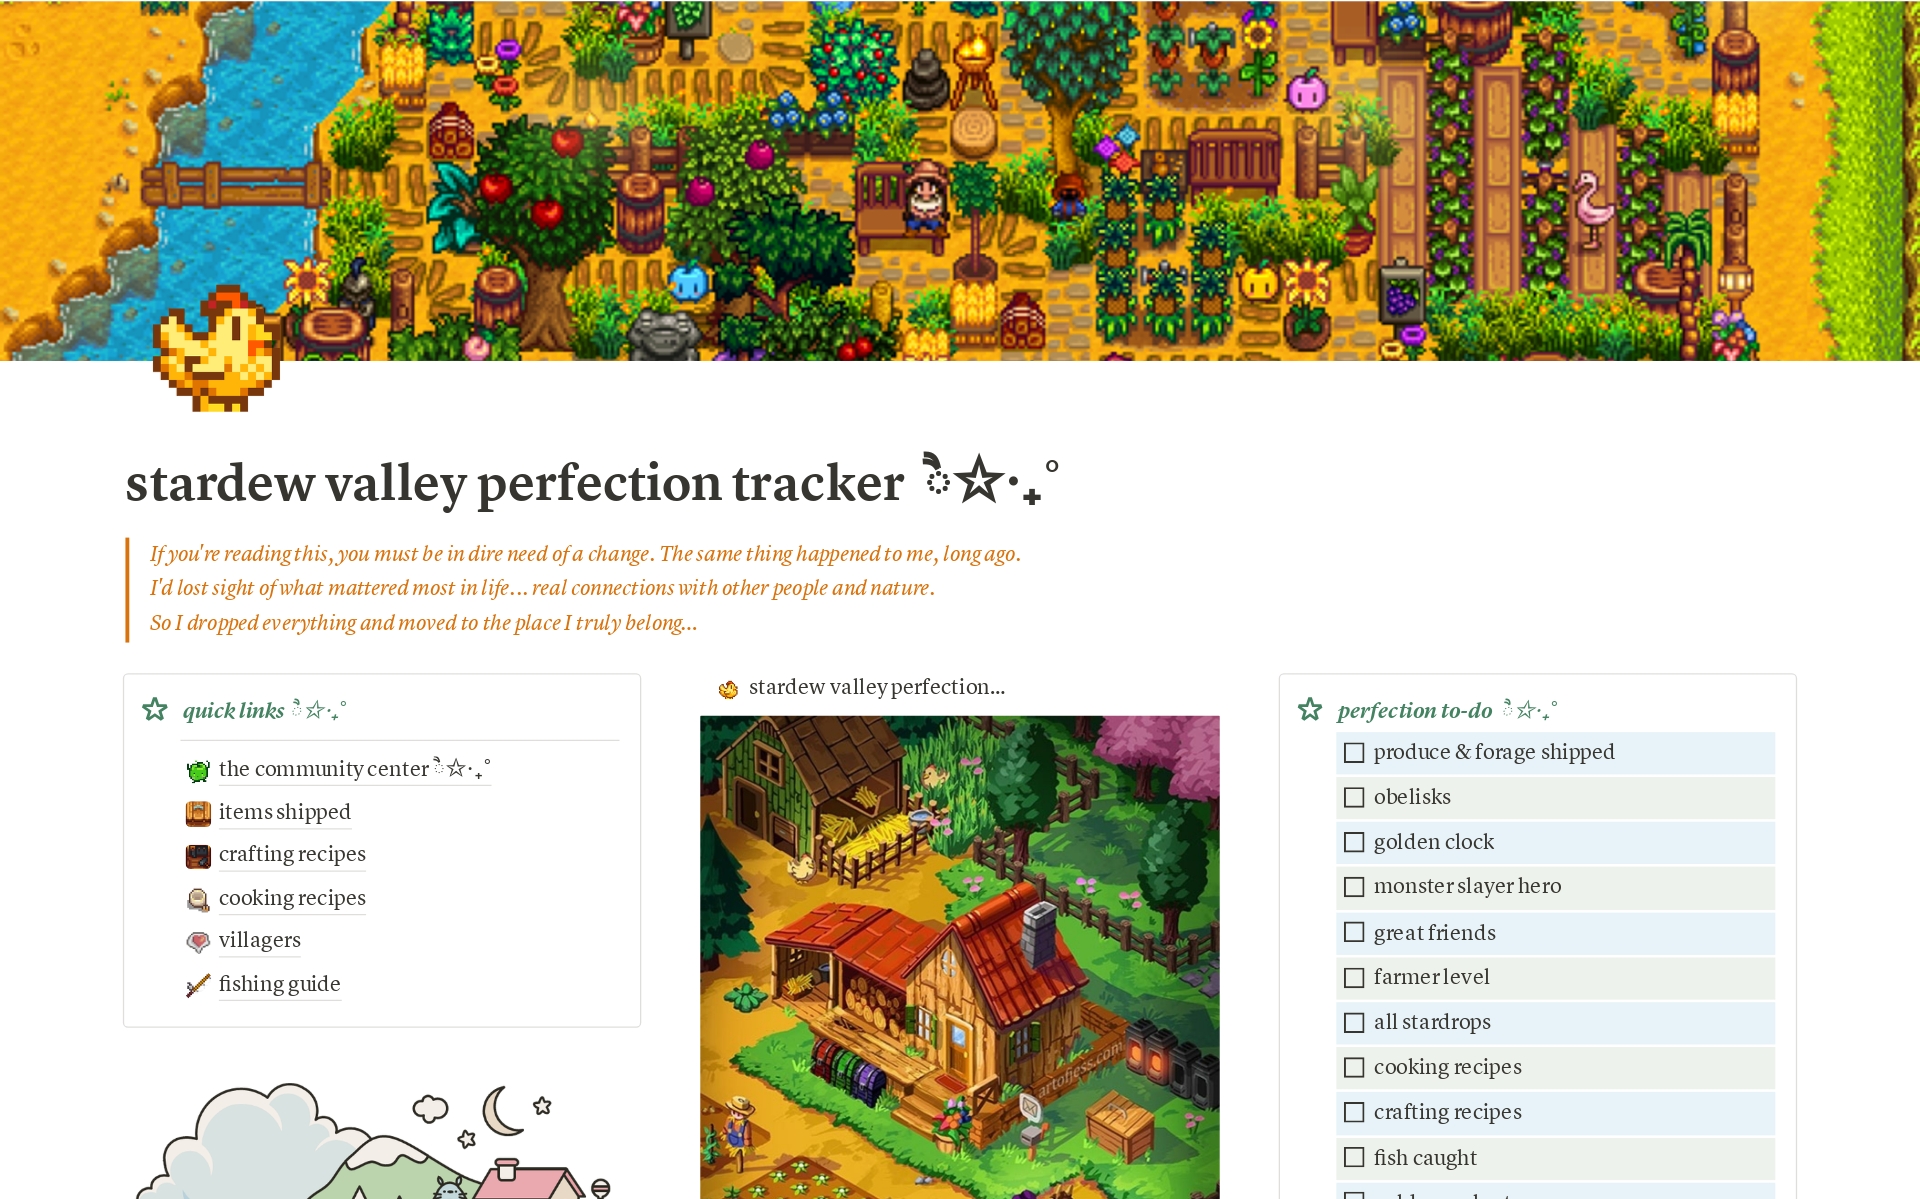 everything you need to keep track of everything needed to 100% your farm in stardew valley!